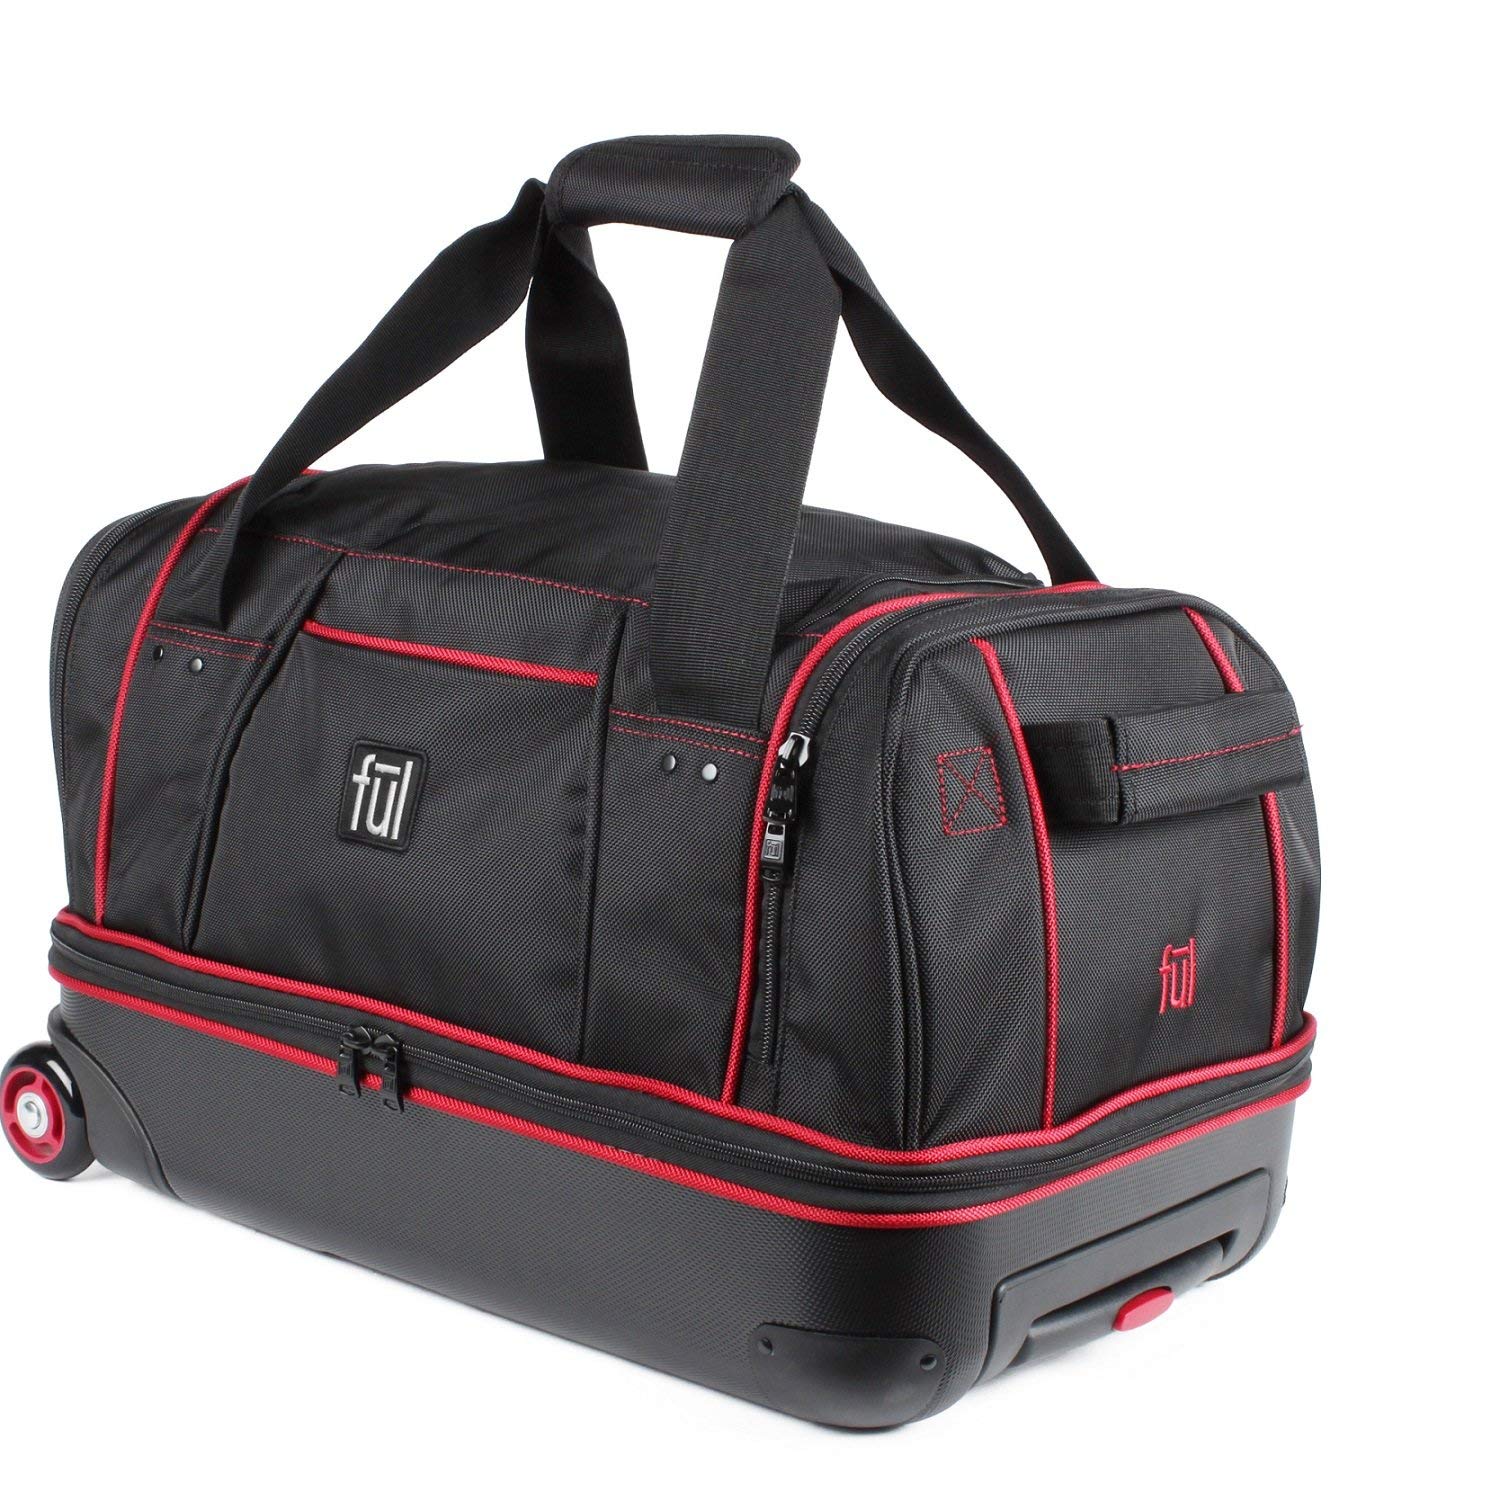 Today only: FUL Flex Mini hybrid rolling 21″ carry-on duffel for $39 shipped